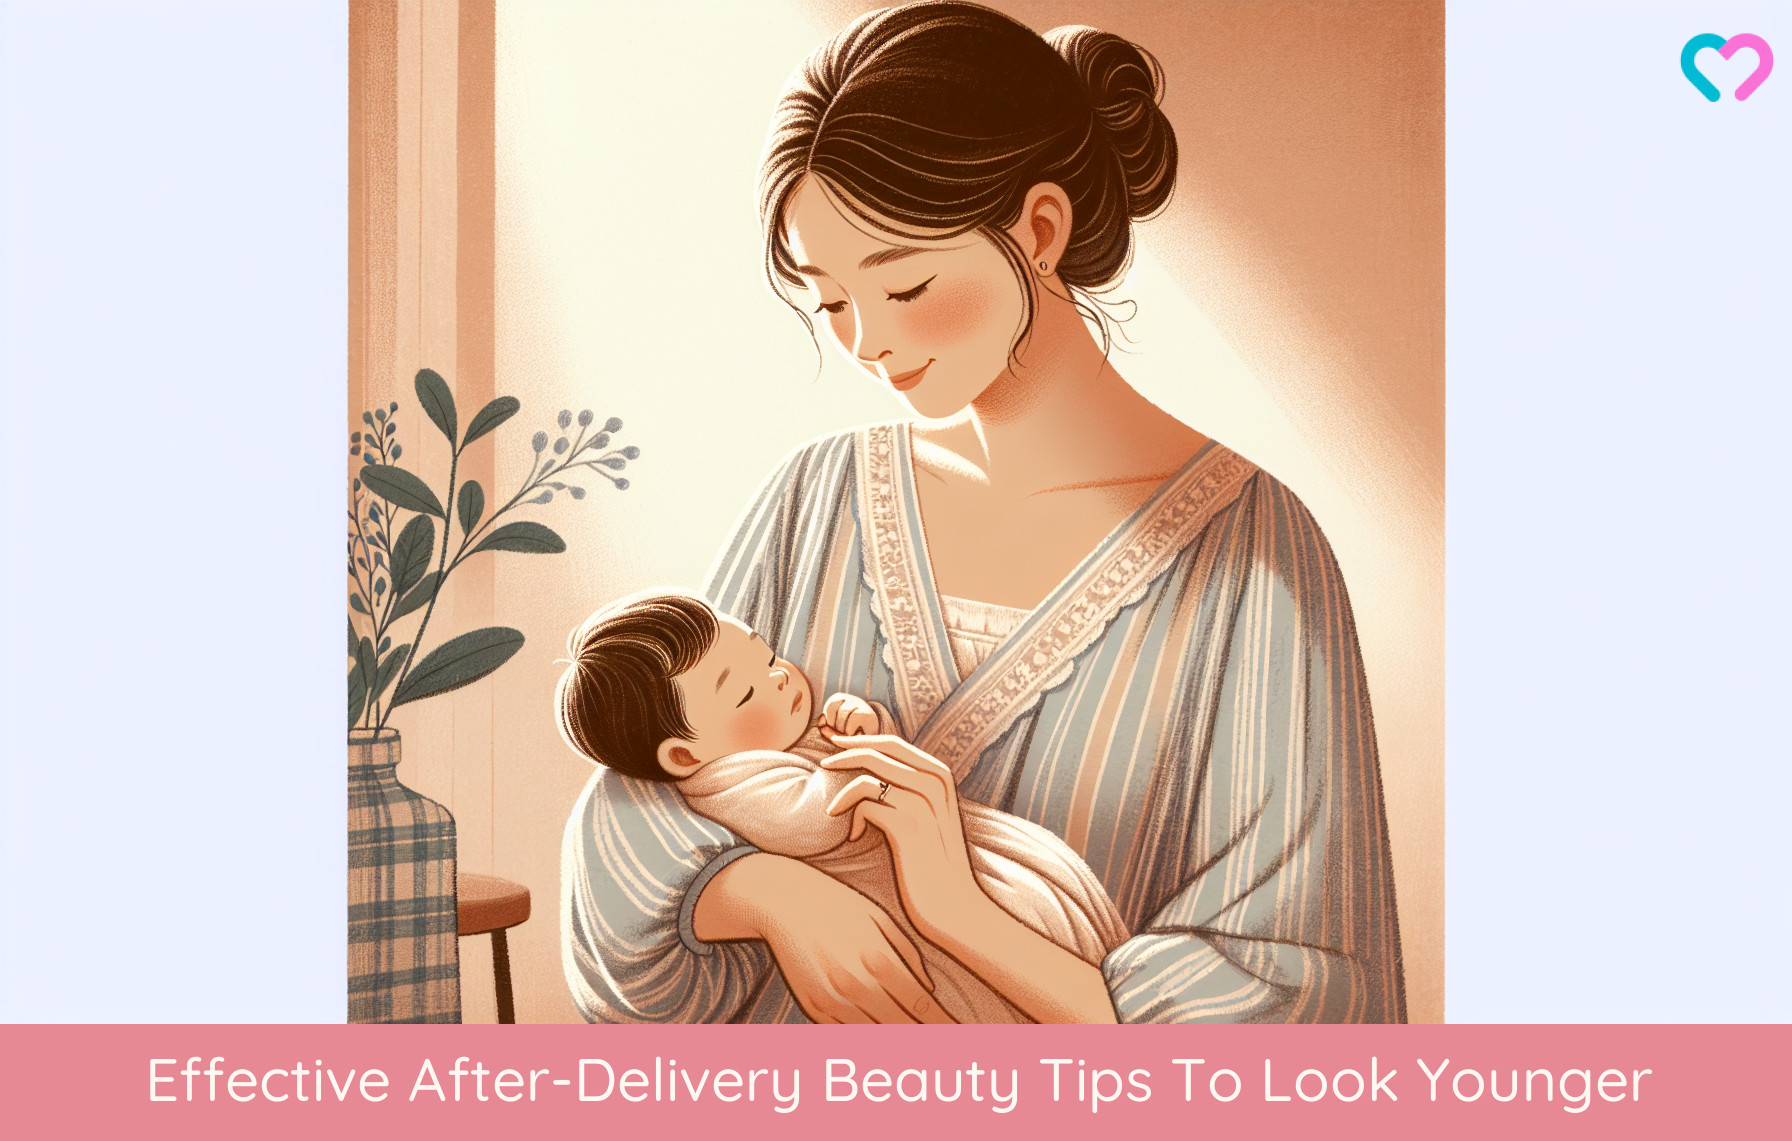 Beauty Tips After Delivery_illustration